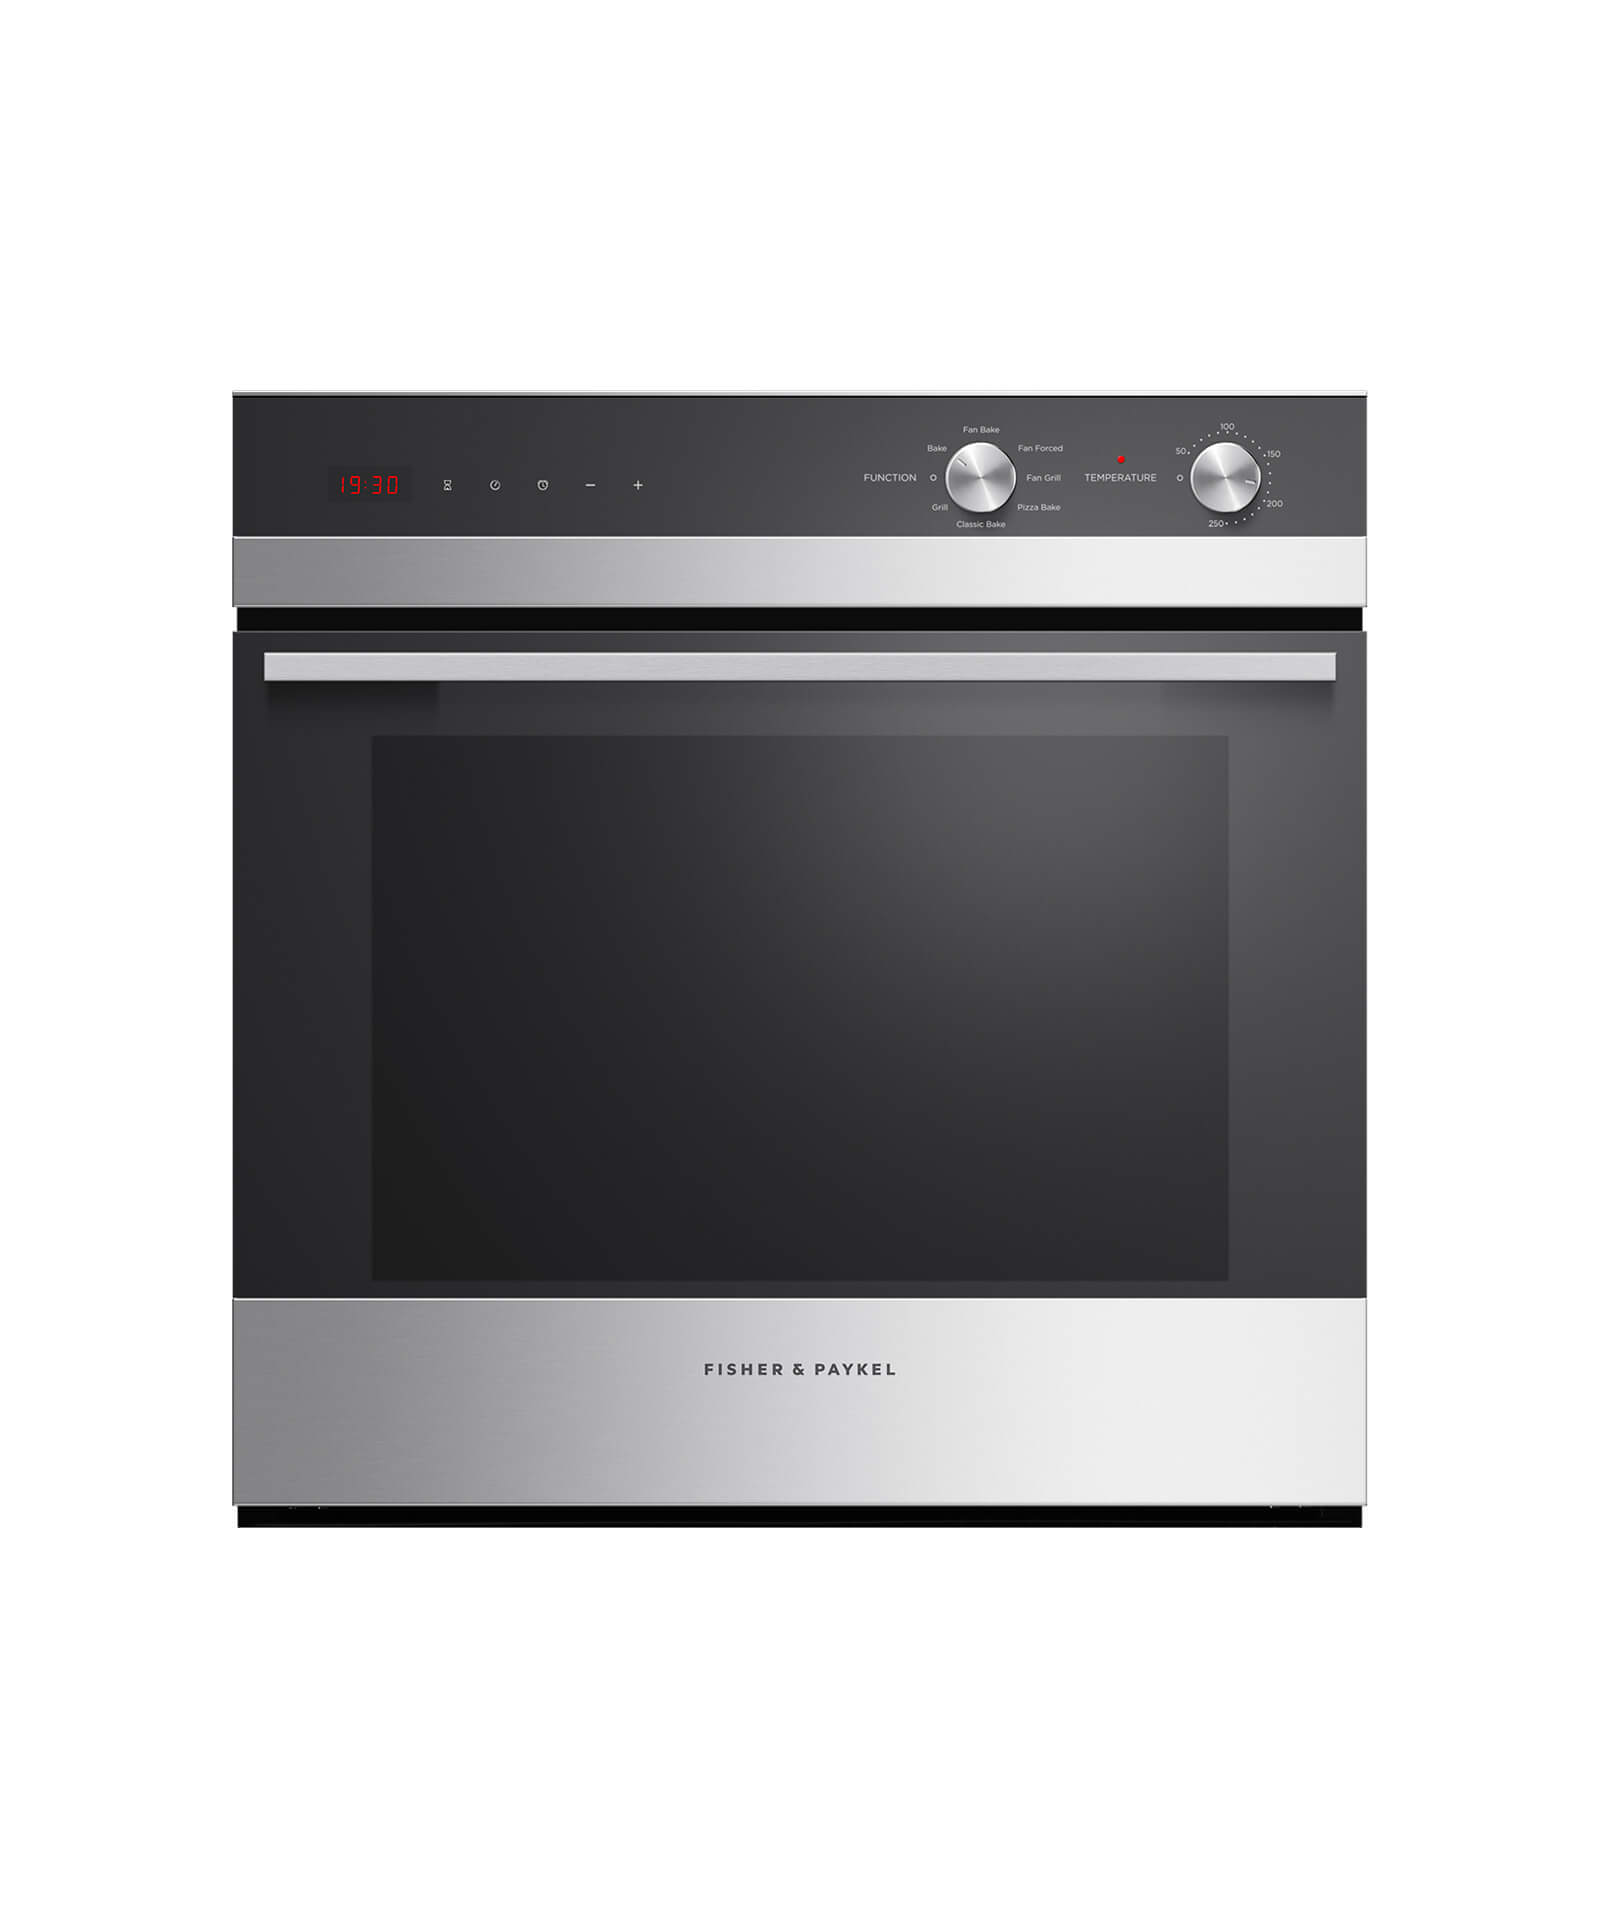 OB60SC7CEX2 - Built-in Oven 60cm, 85L, 7 Function | Fisher & Paykel NZ